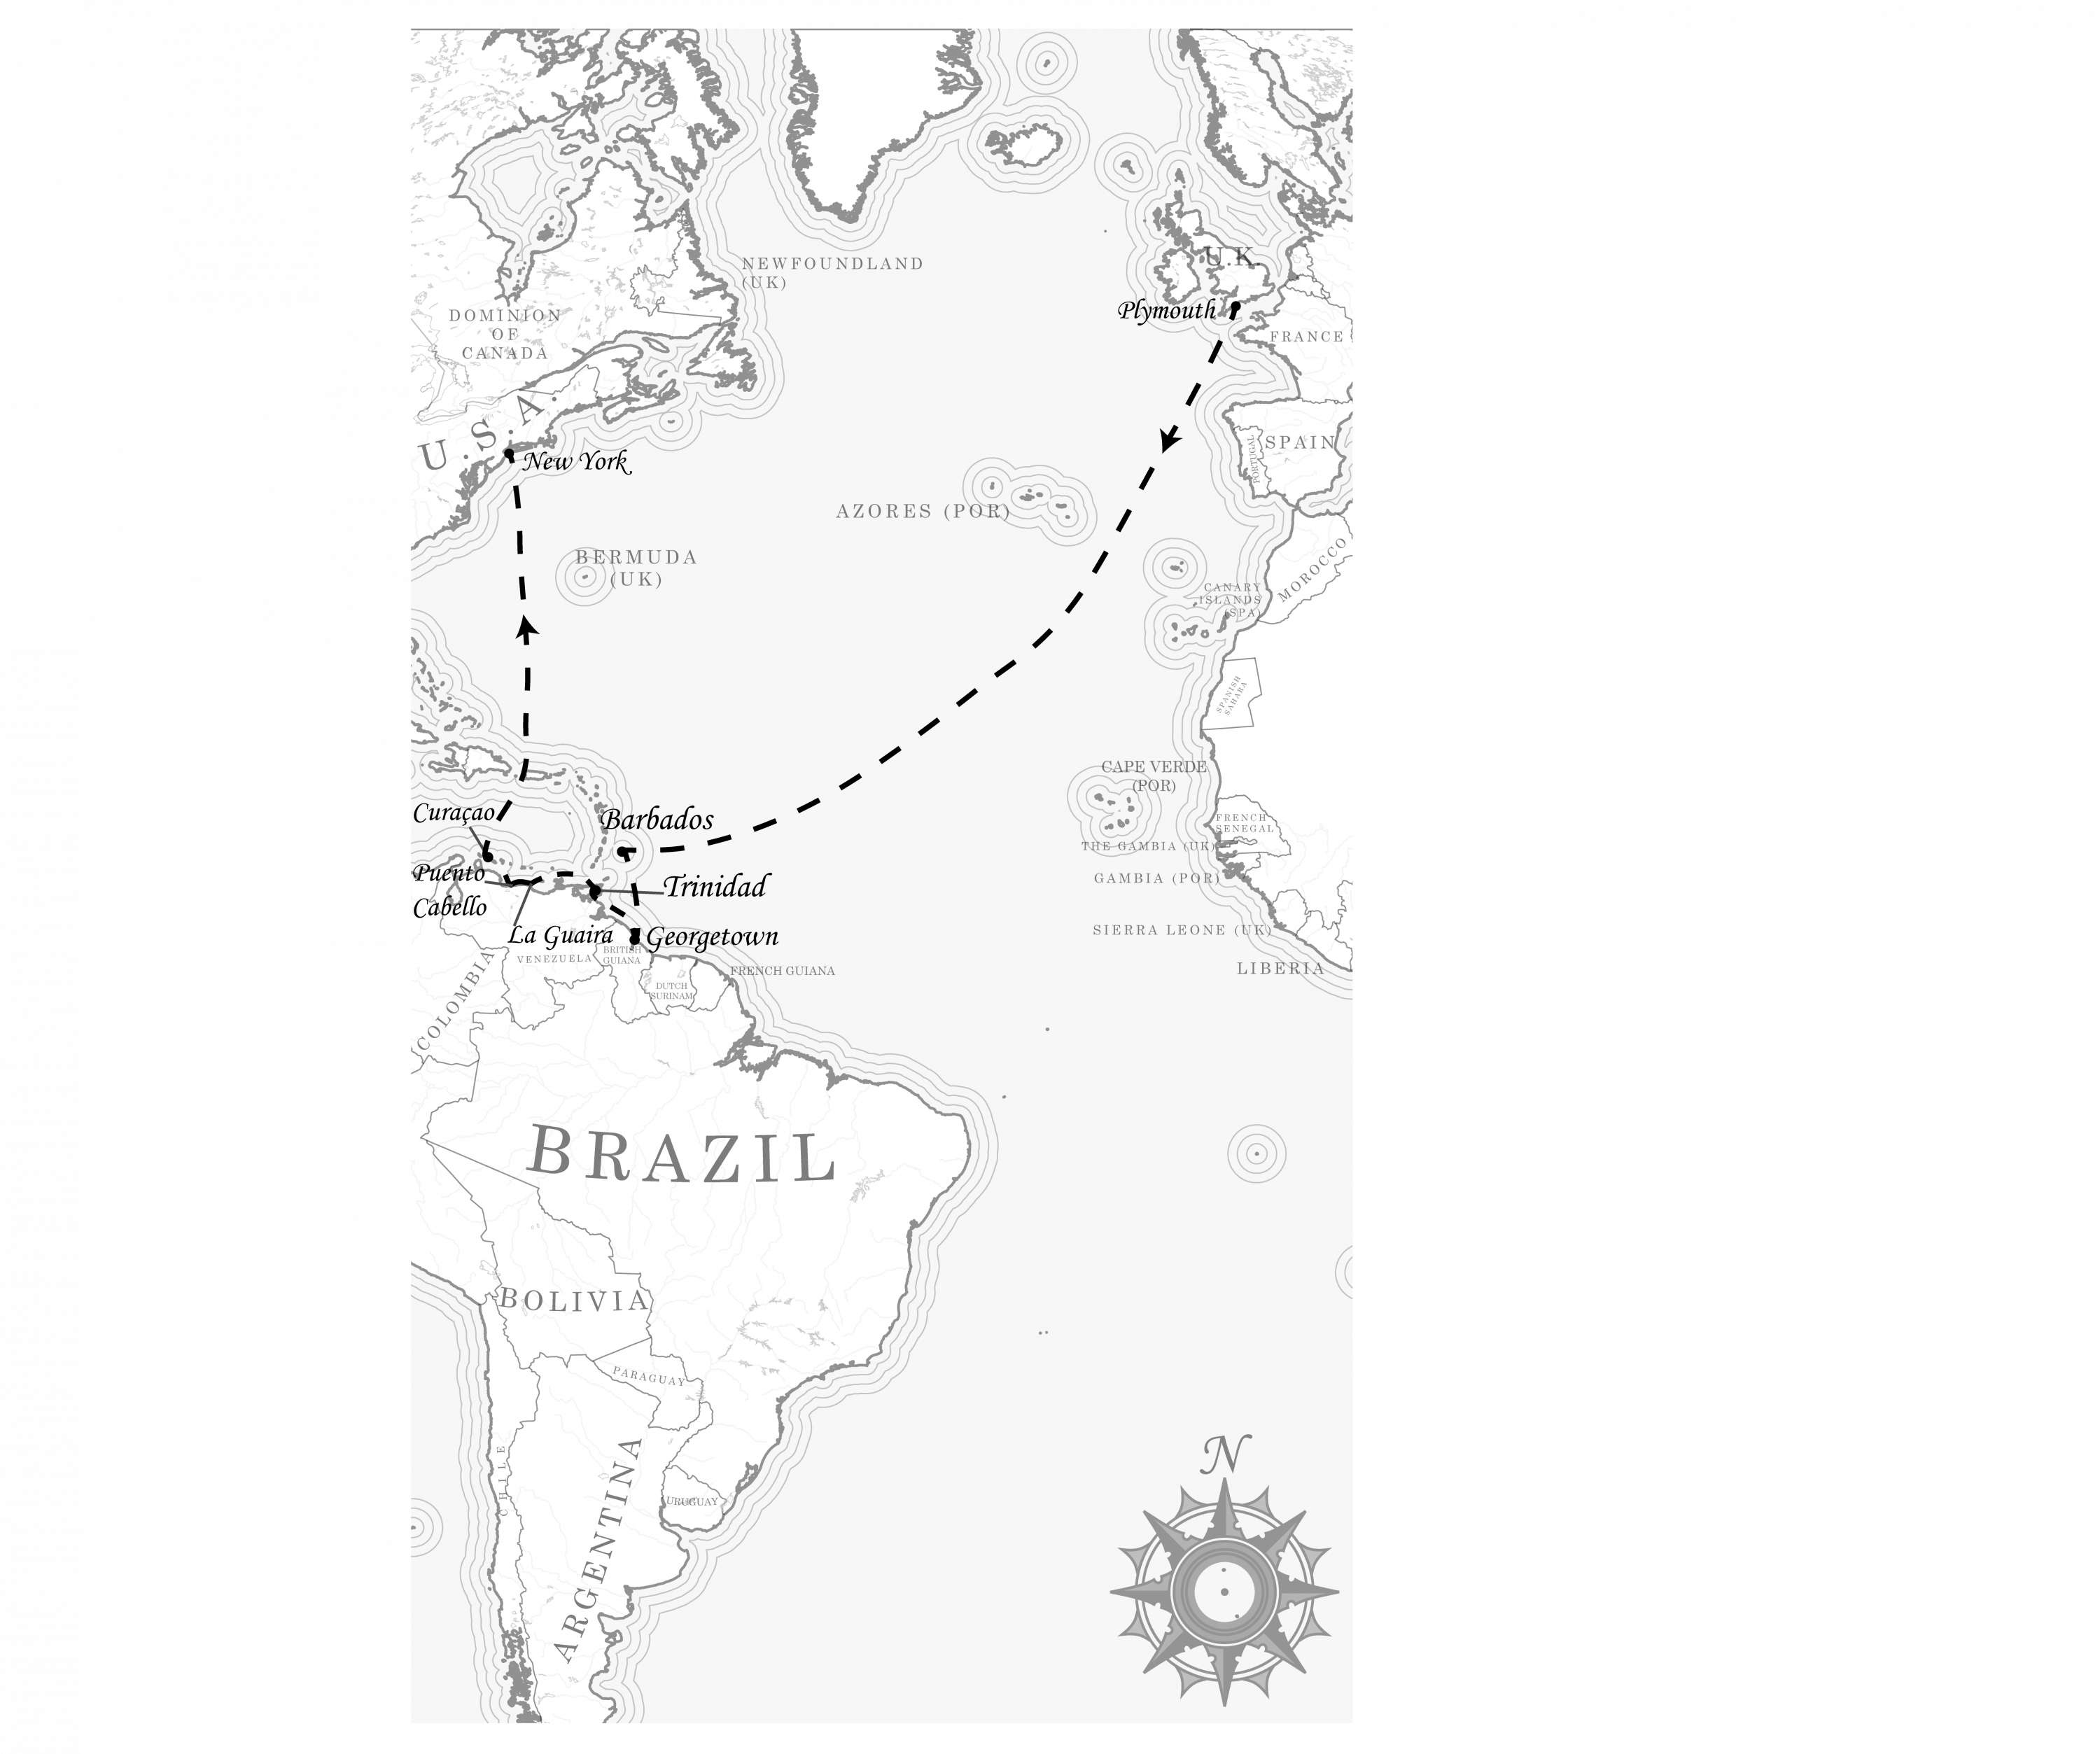 Map of the 1889-1890 voyage by John McCaldin Loewenthal, showing the places mentioned in the letter and an approximate route for his travels from Plymouth to South America and then to New York